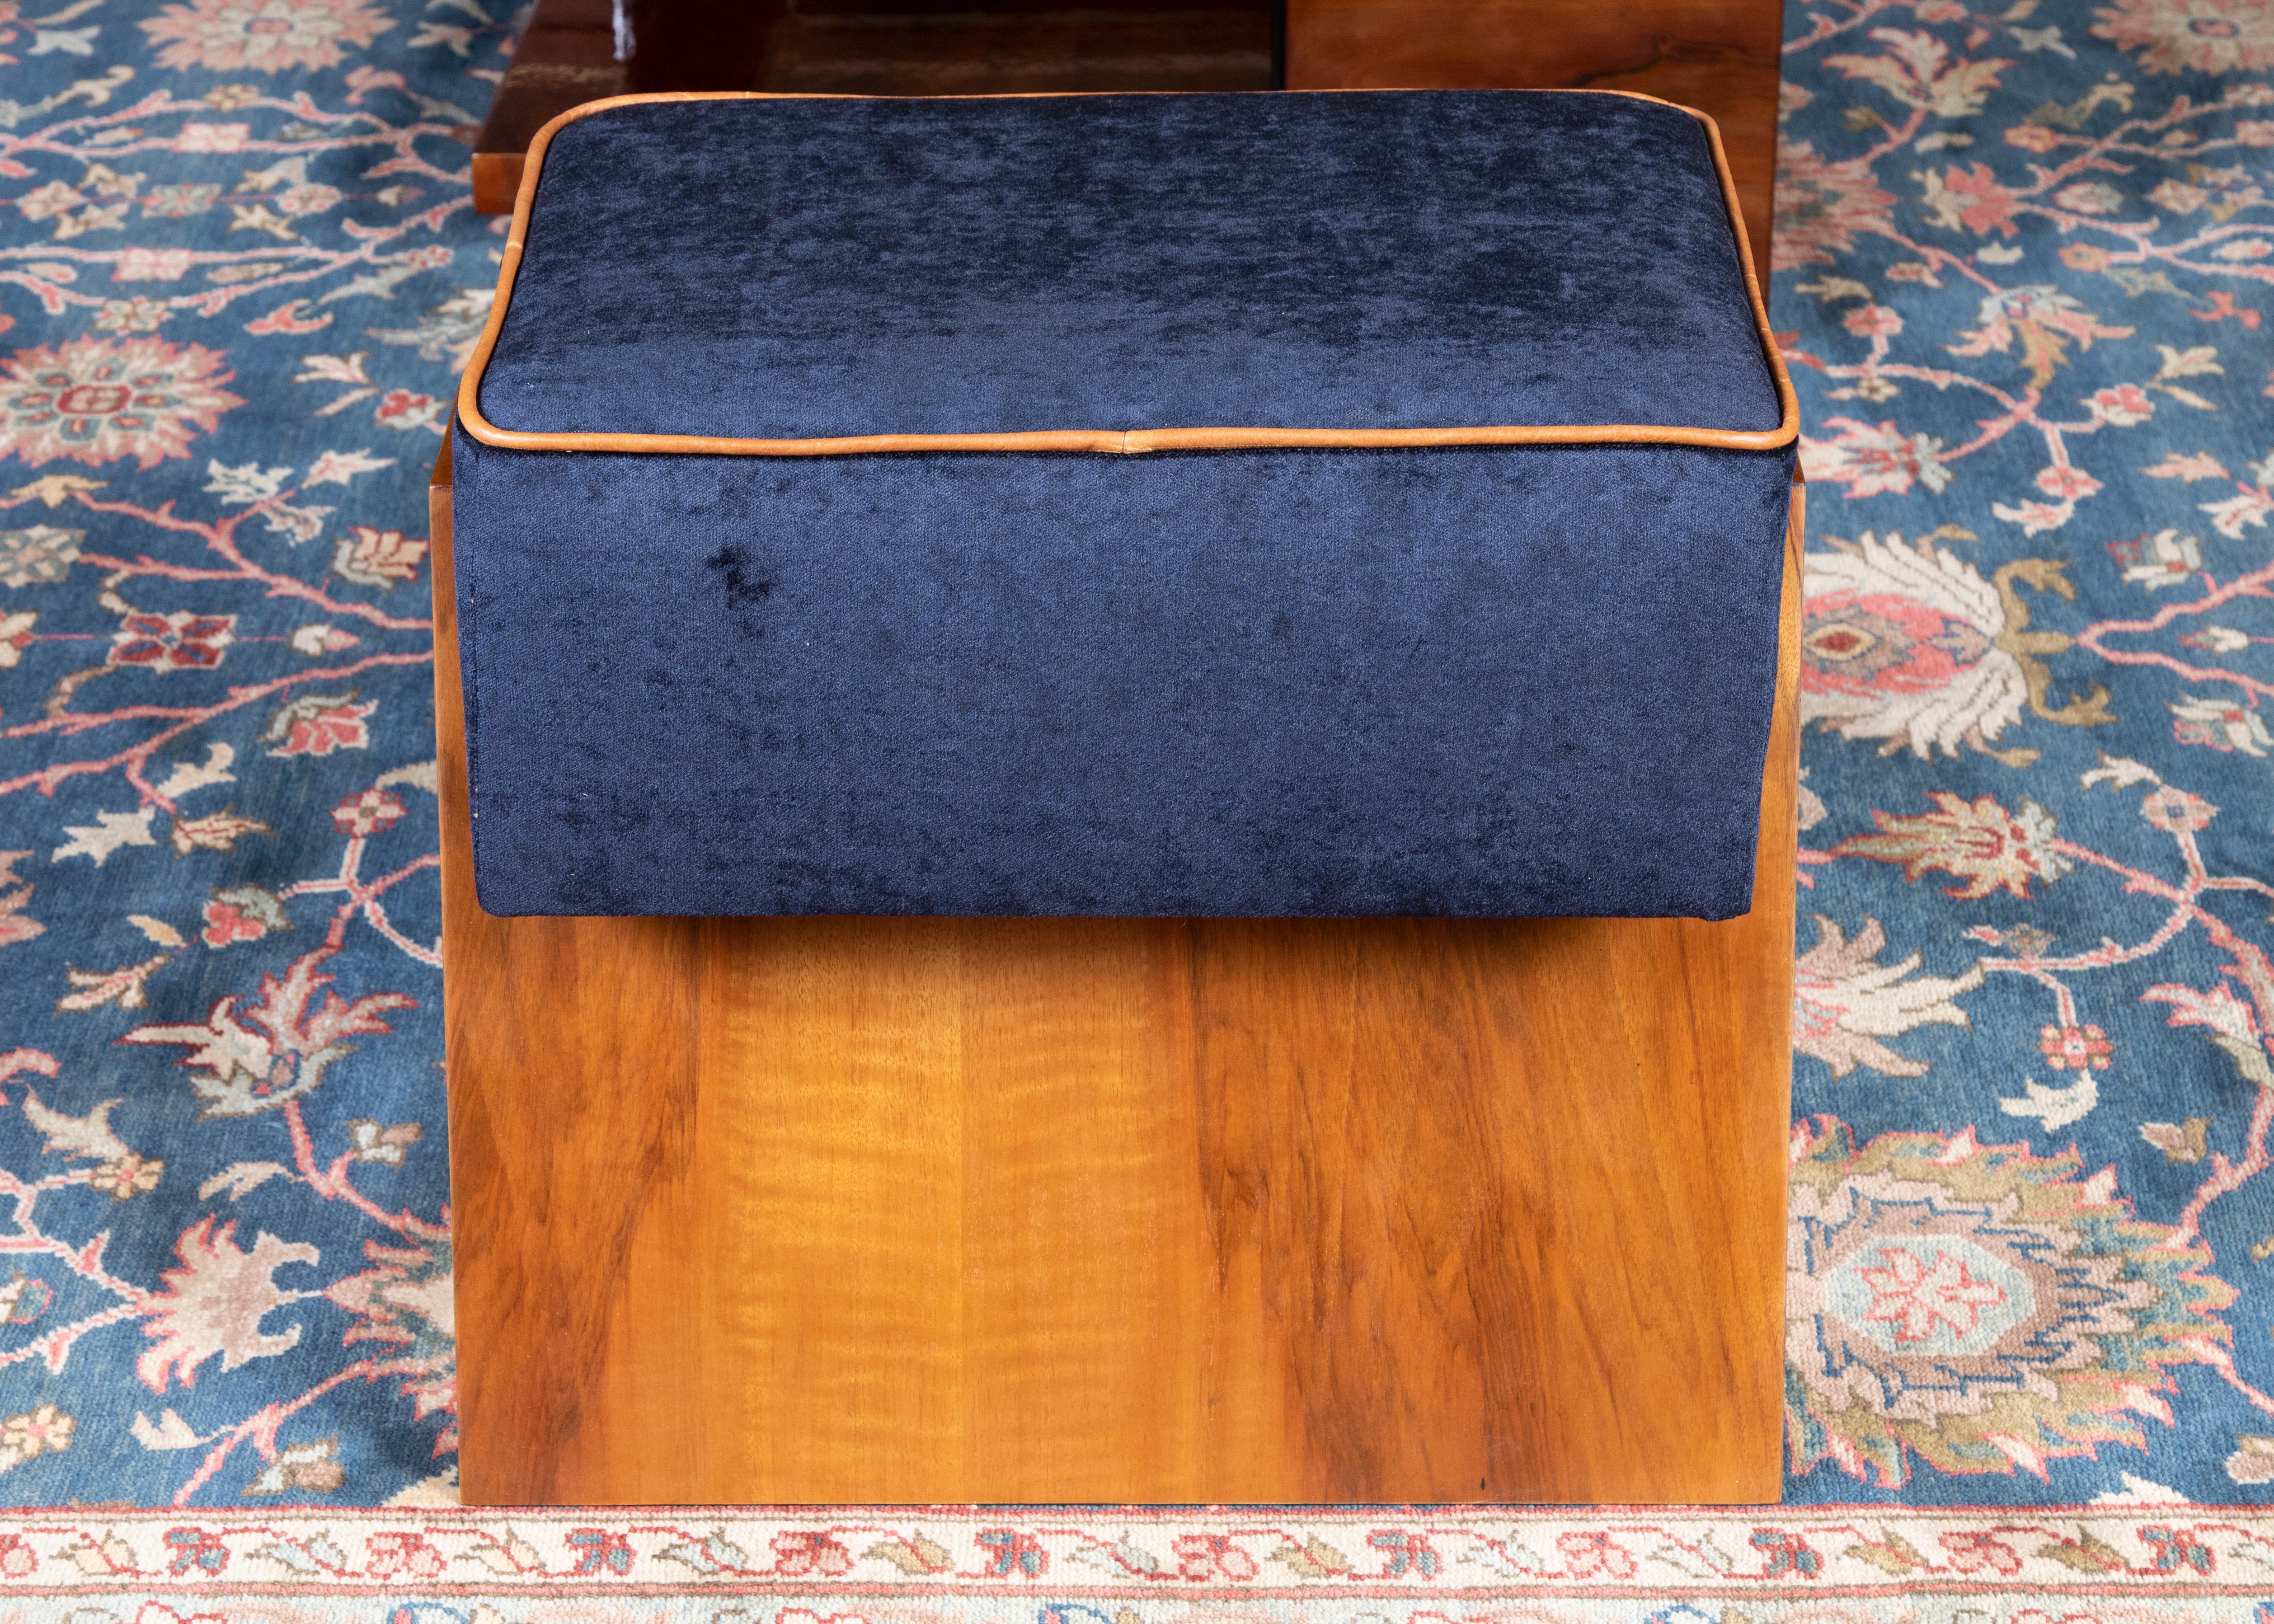  Art Deco ottoman in
 Beech wood

 Each ottoman is made out of walnut wood. Newly re-upholstered in a blue fabric. Edges of the top have leather trimming,


 France, c. 1930s

Measures: 21” W x 13” D x 19” H.
  